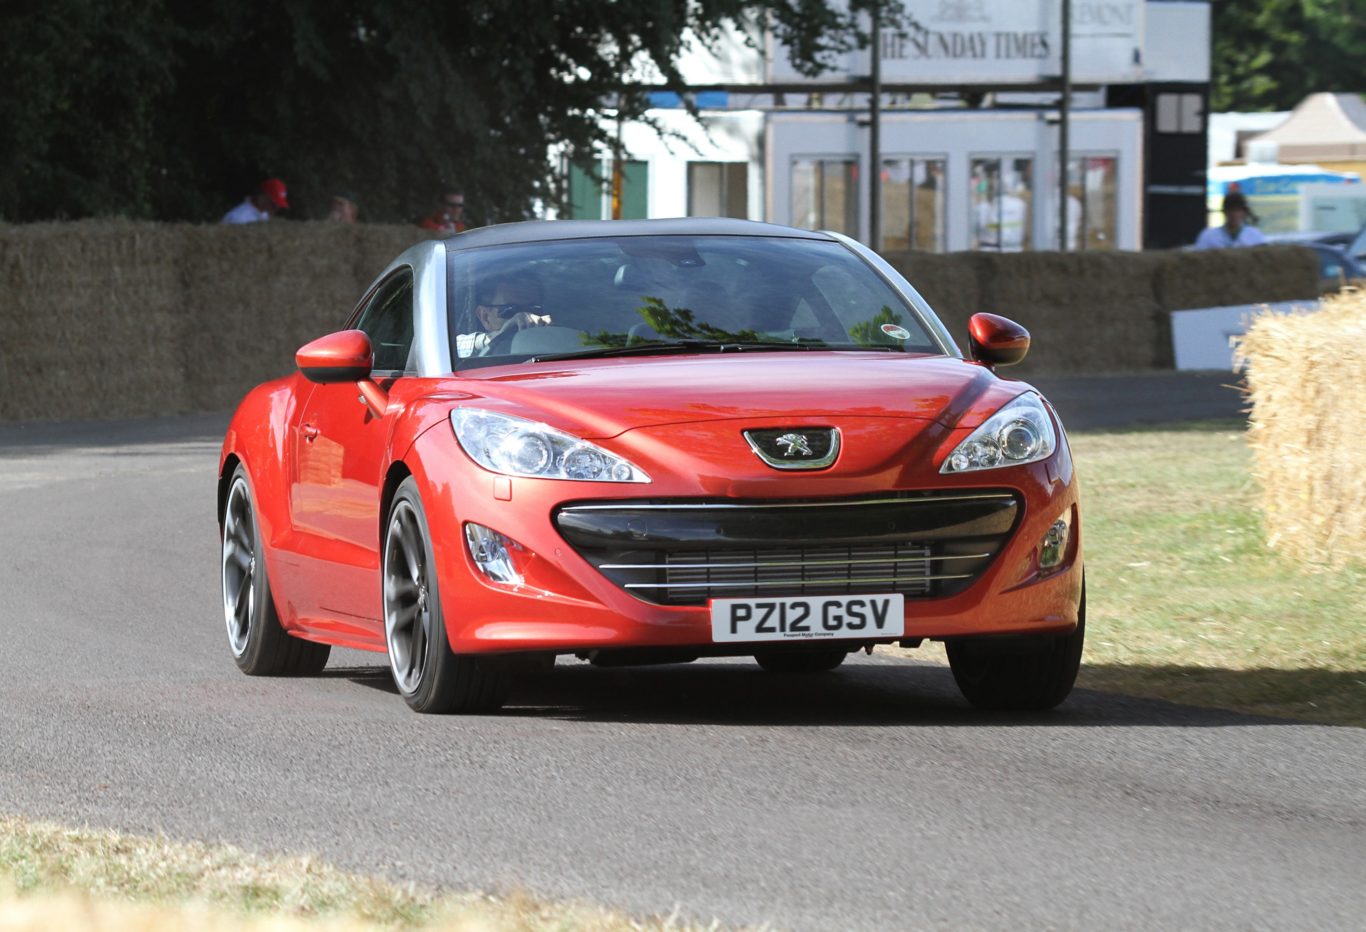 The Peugeot RCZ featured striking styling and a domed glass roof